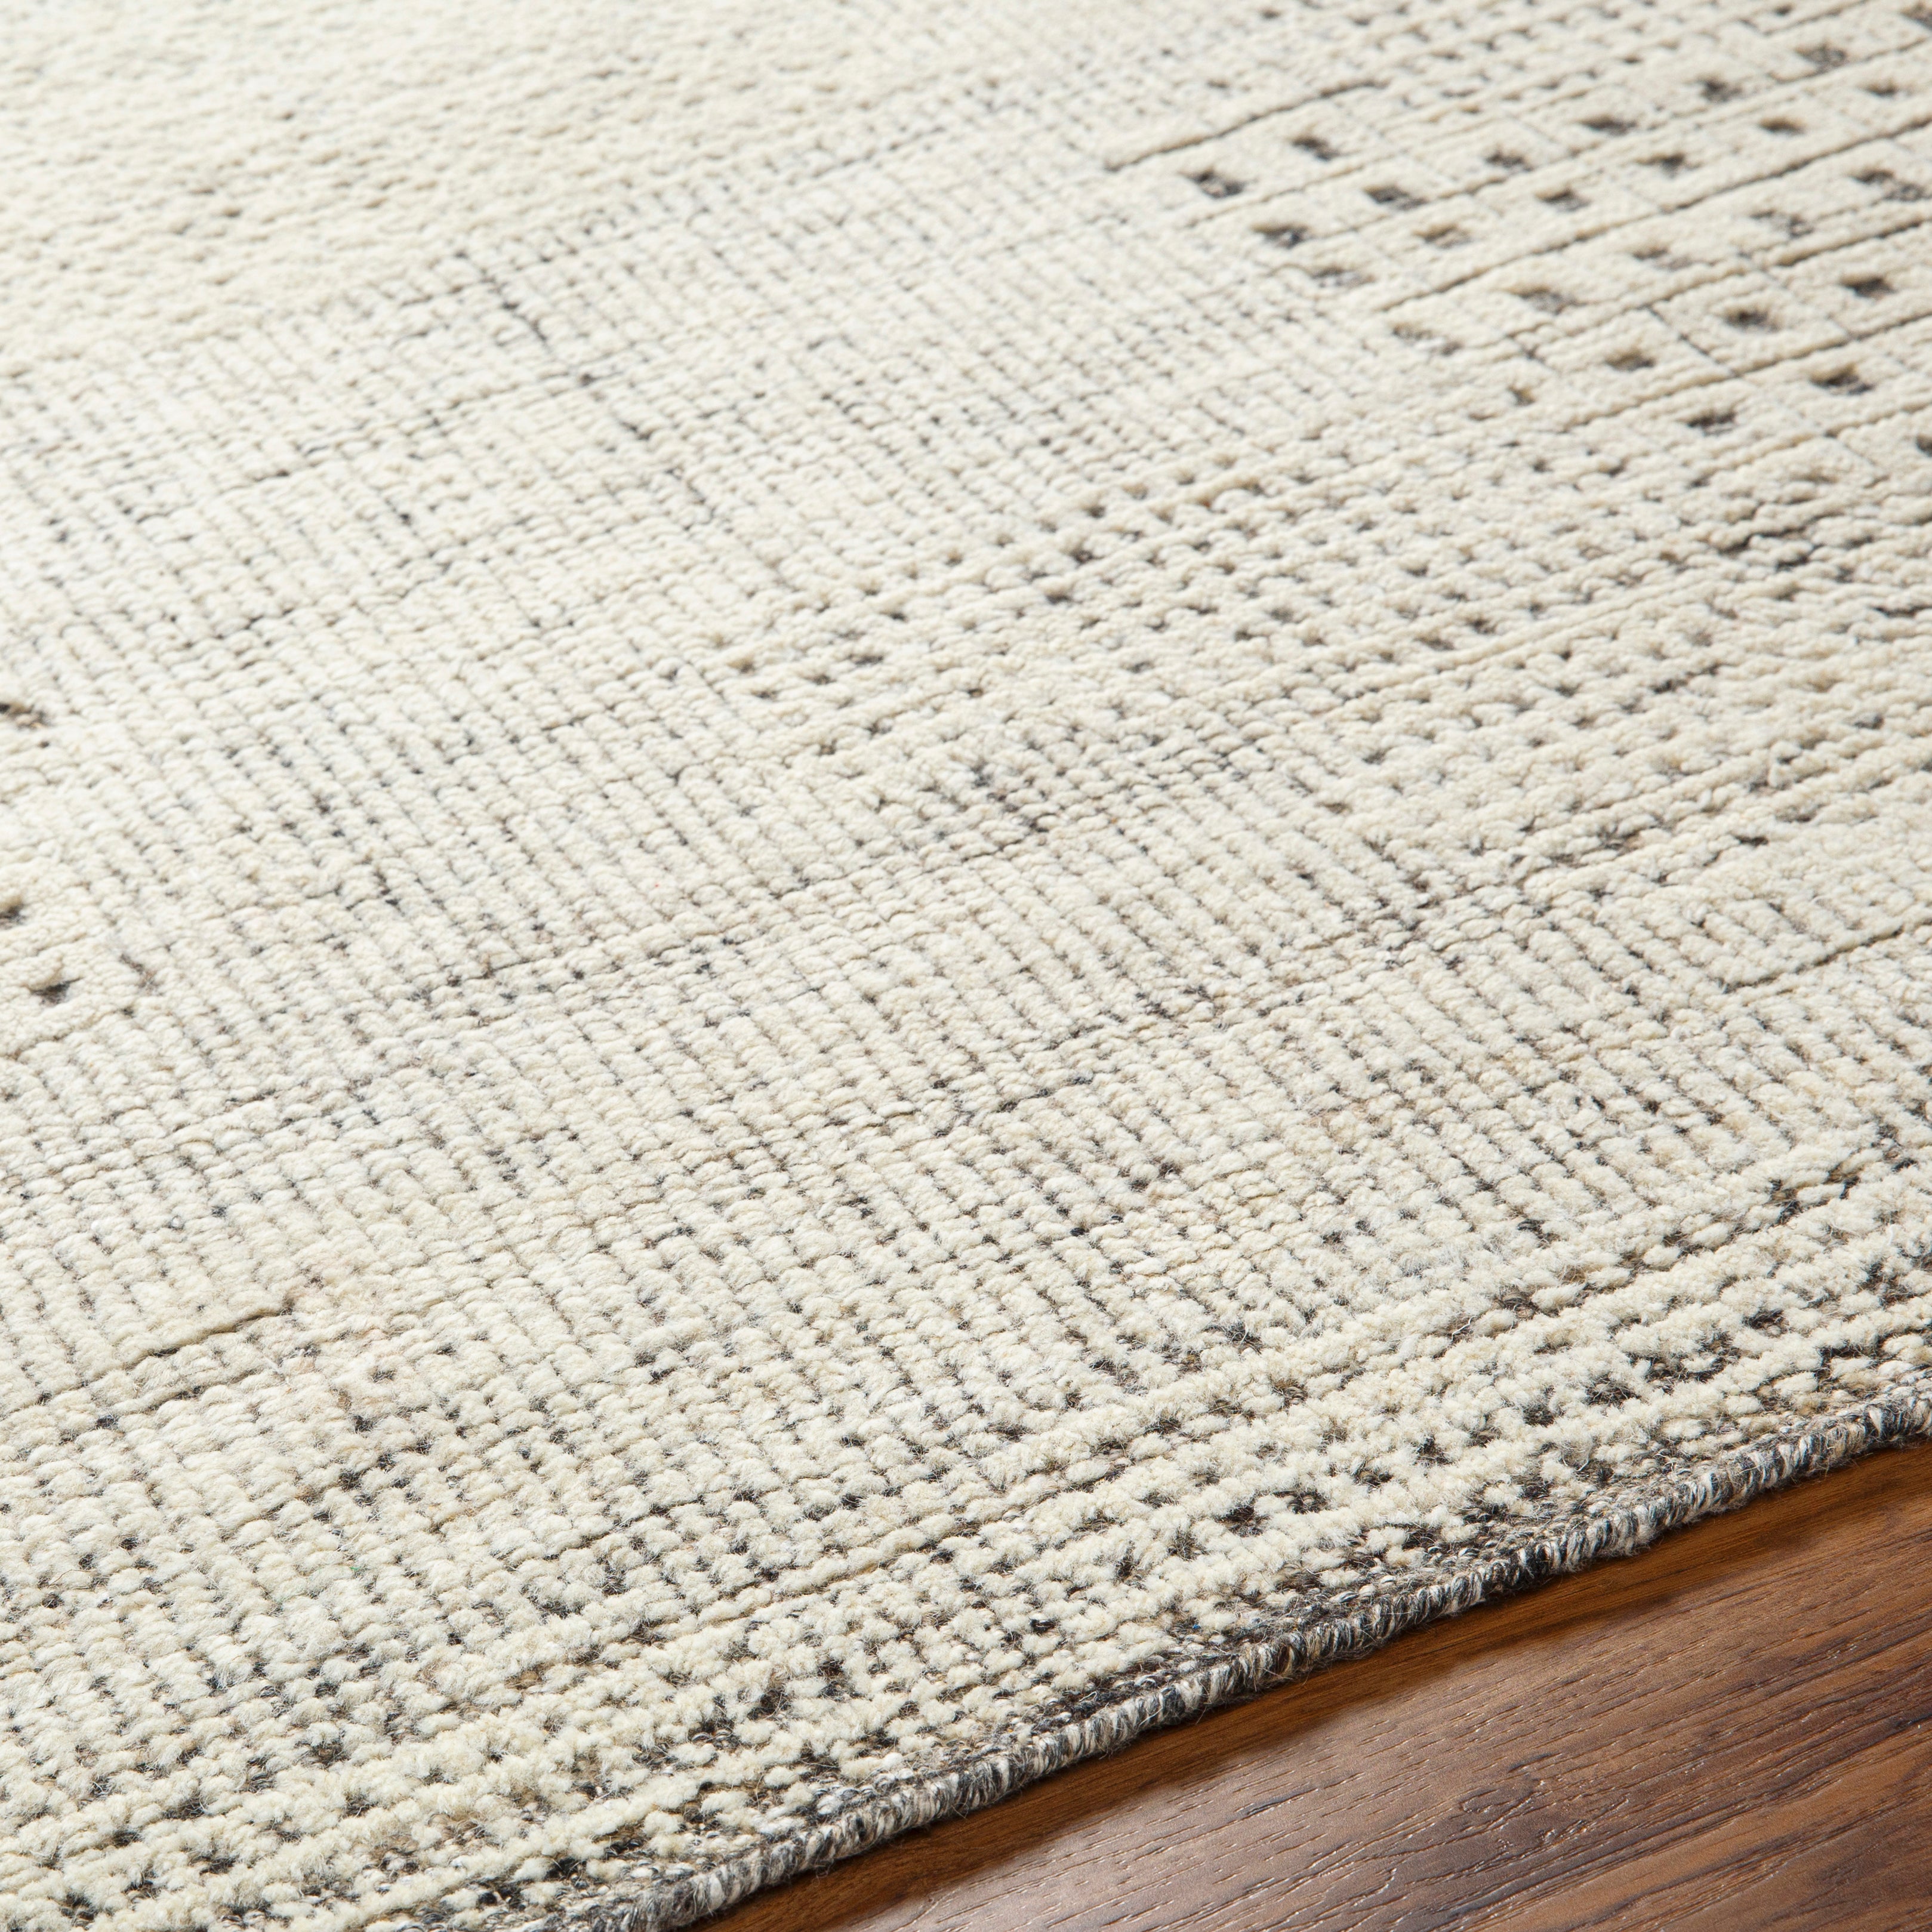 The Tunus Taupe Rug features a globally inspired design made from wool. The hand-knotted rug adds wabi sabi charm to any room. Amethyst Home provides interior design, new home construction design consulting, vintage area rugs, and lighting in the Kansas City metro area.